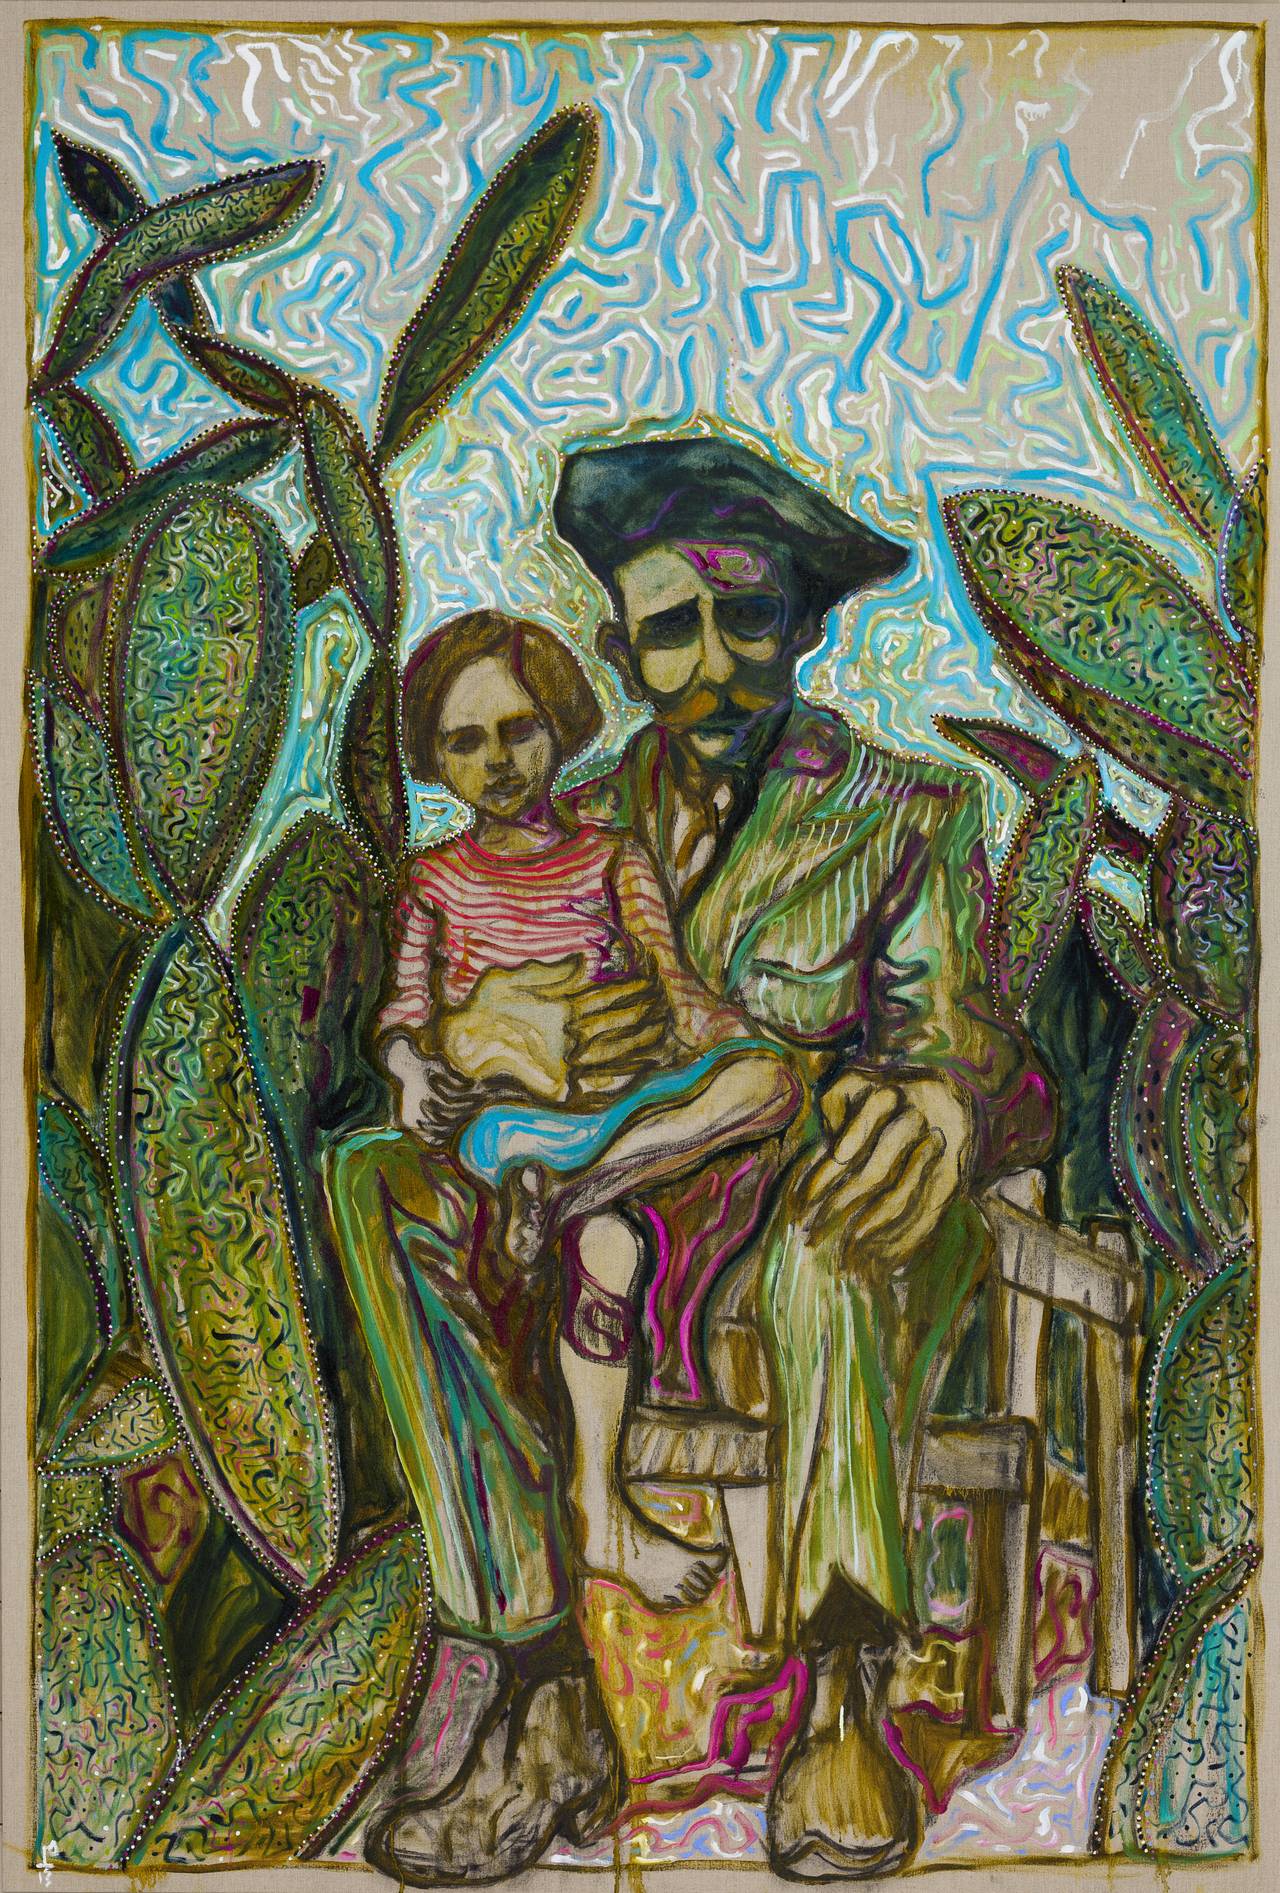 amongst cactus, sitting - Painting by Billy Childish